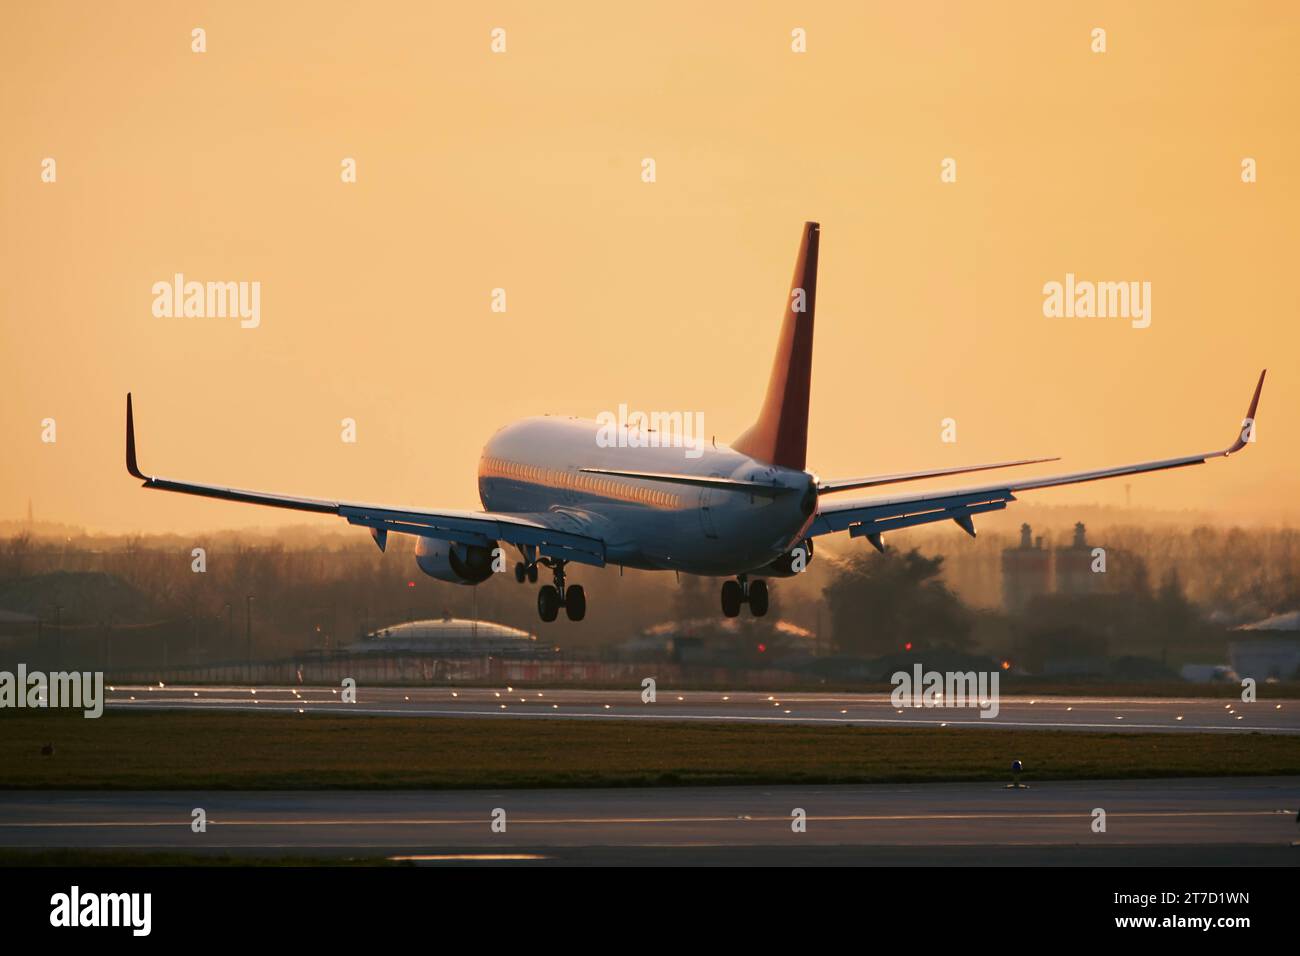 Airplane approaching for landing on airport runway. Passenger plane at golden light of sunset. Orange sky with copy space. Stock Photo